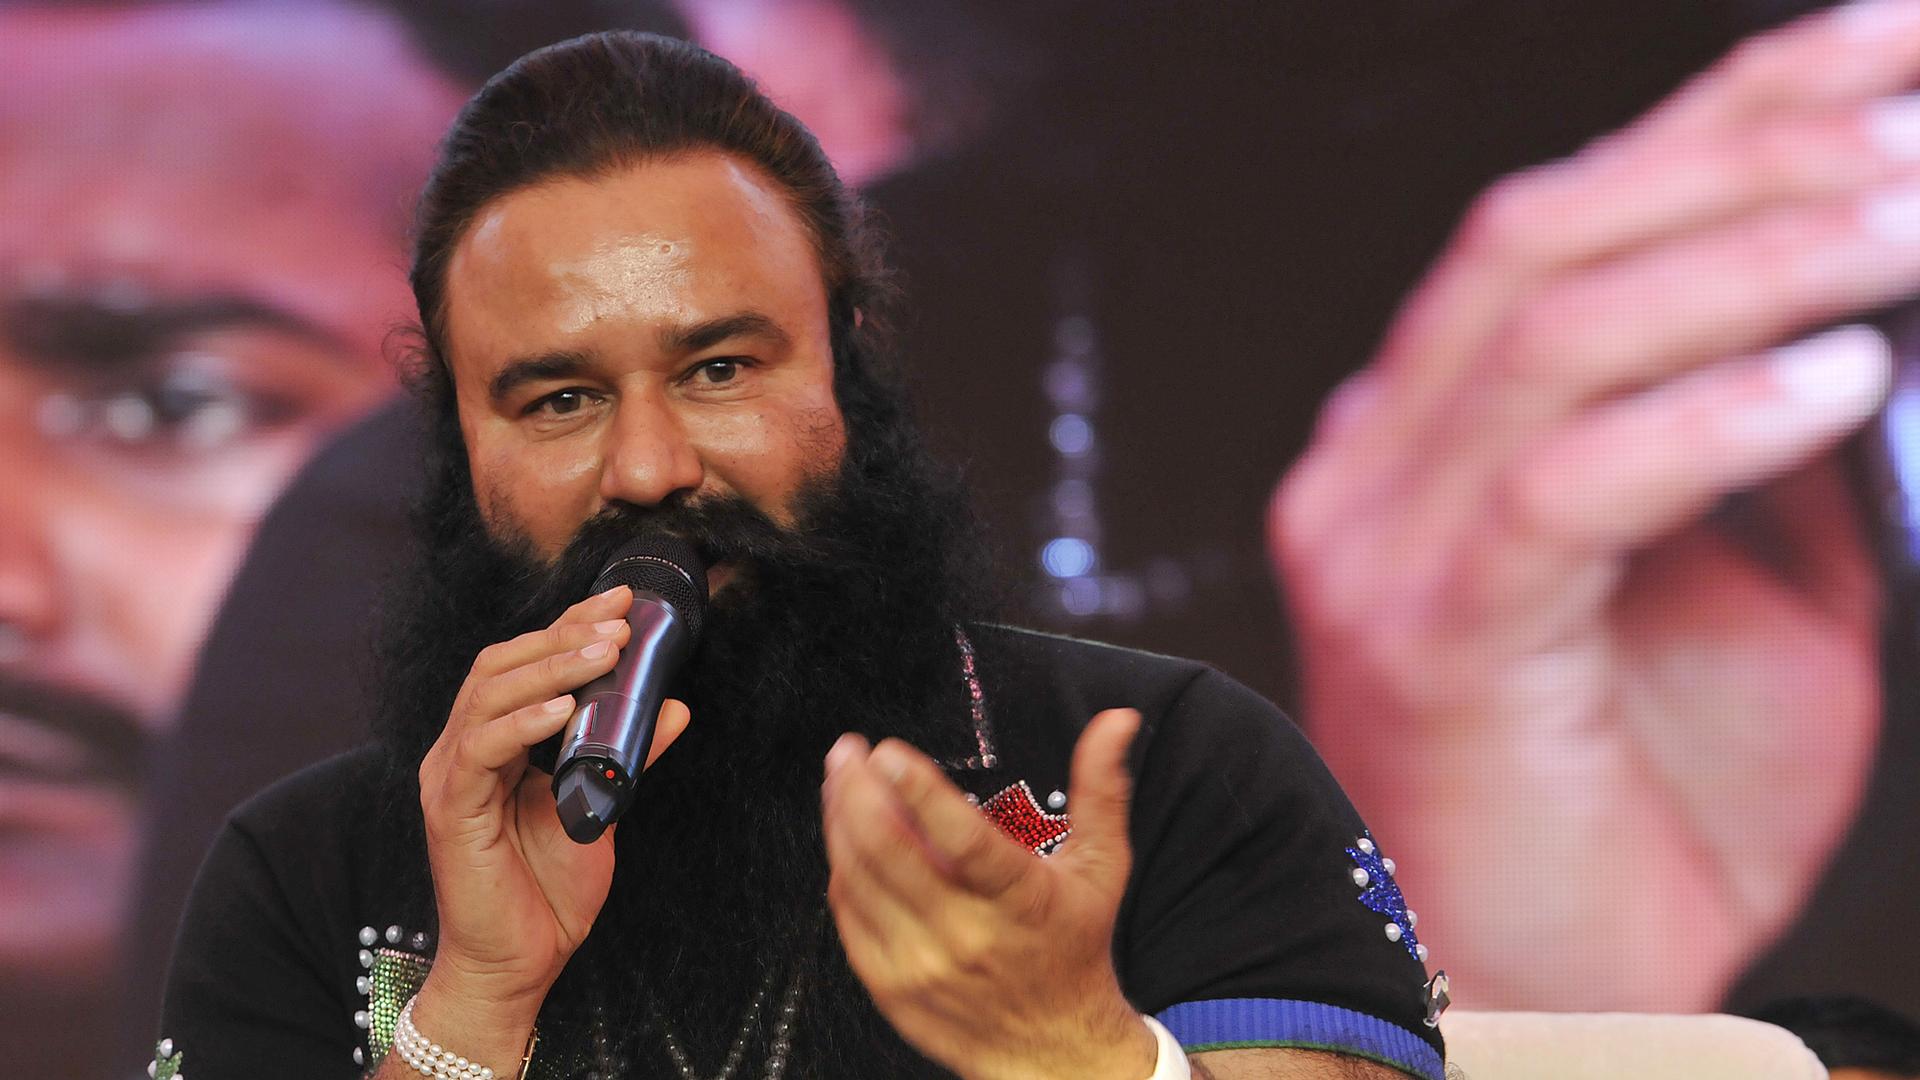 Gurmeet Ram Rahim Singh talks to the media about his movie "MSG — The Messenger of God" in 2015.